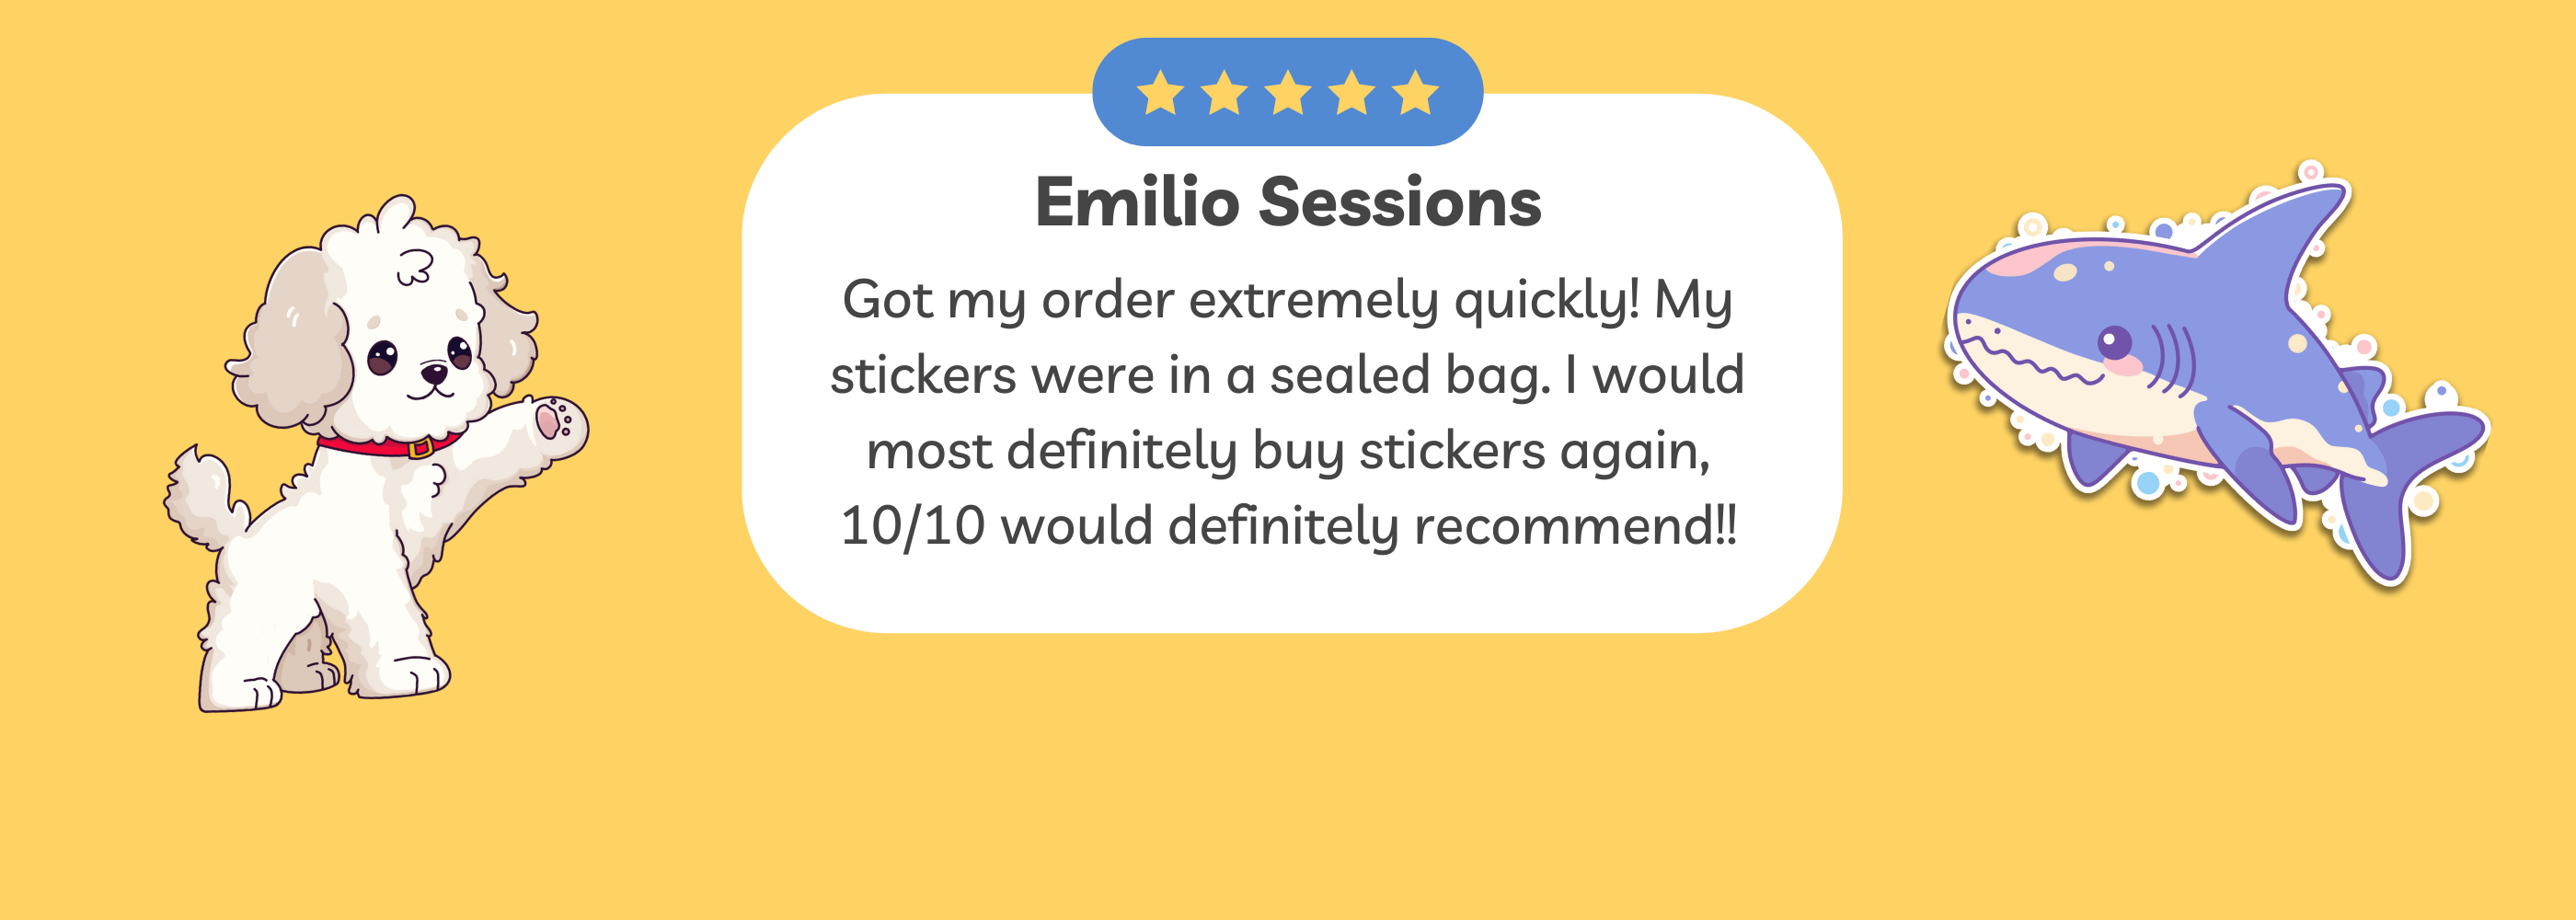 5 Star Review from a customer